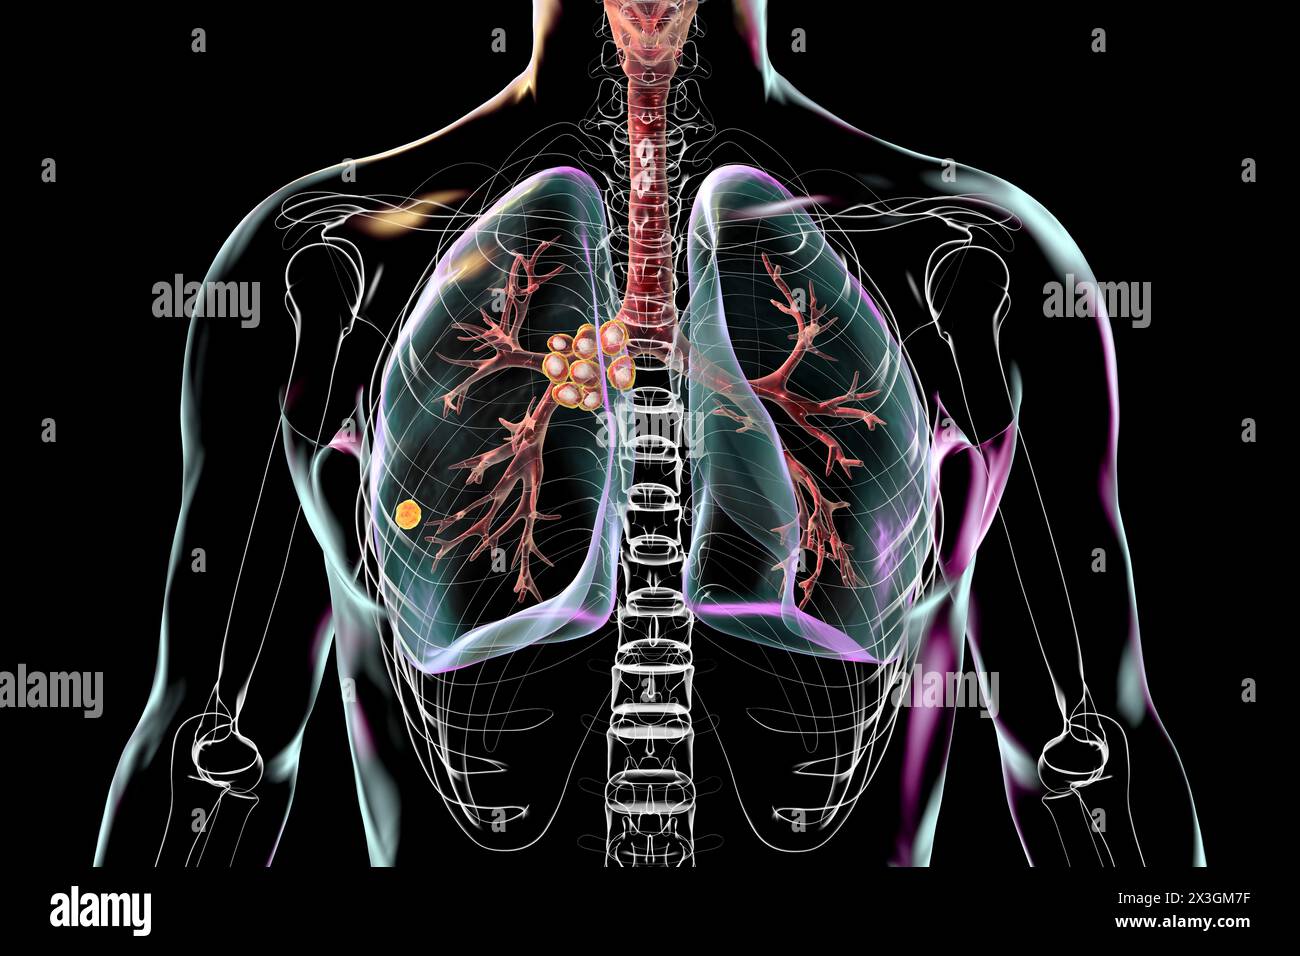 Illustration of primary lung tuberculosis with the Ranke complex, highlighting pulmonary lesions and mediastinal lymphadenitis. Stock Photo